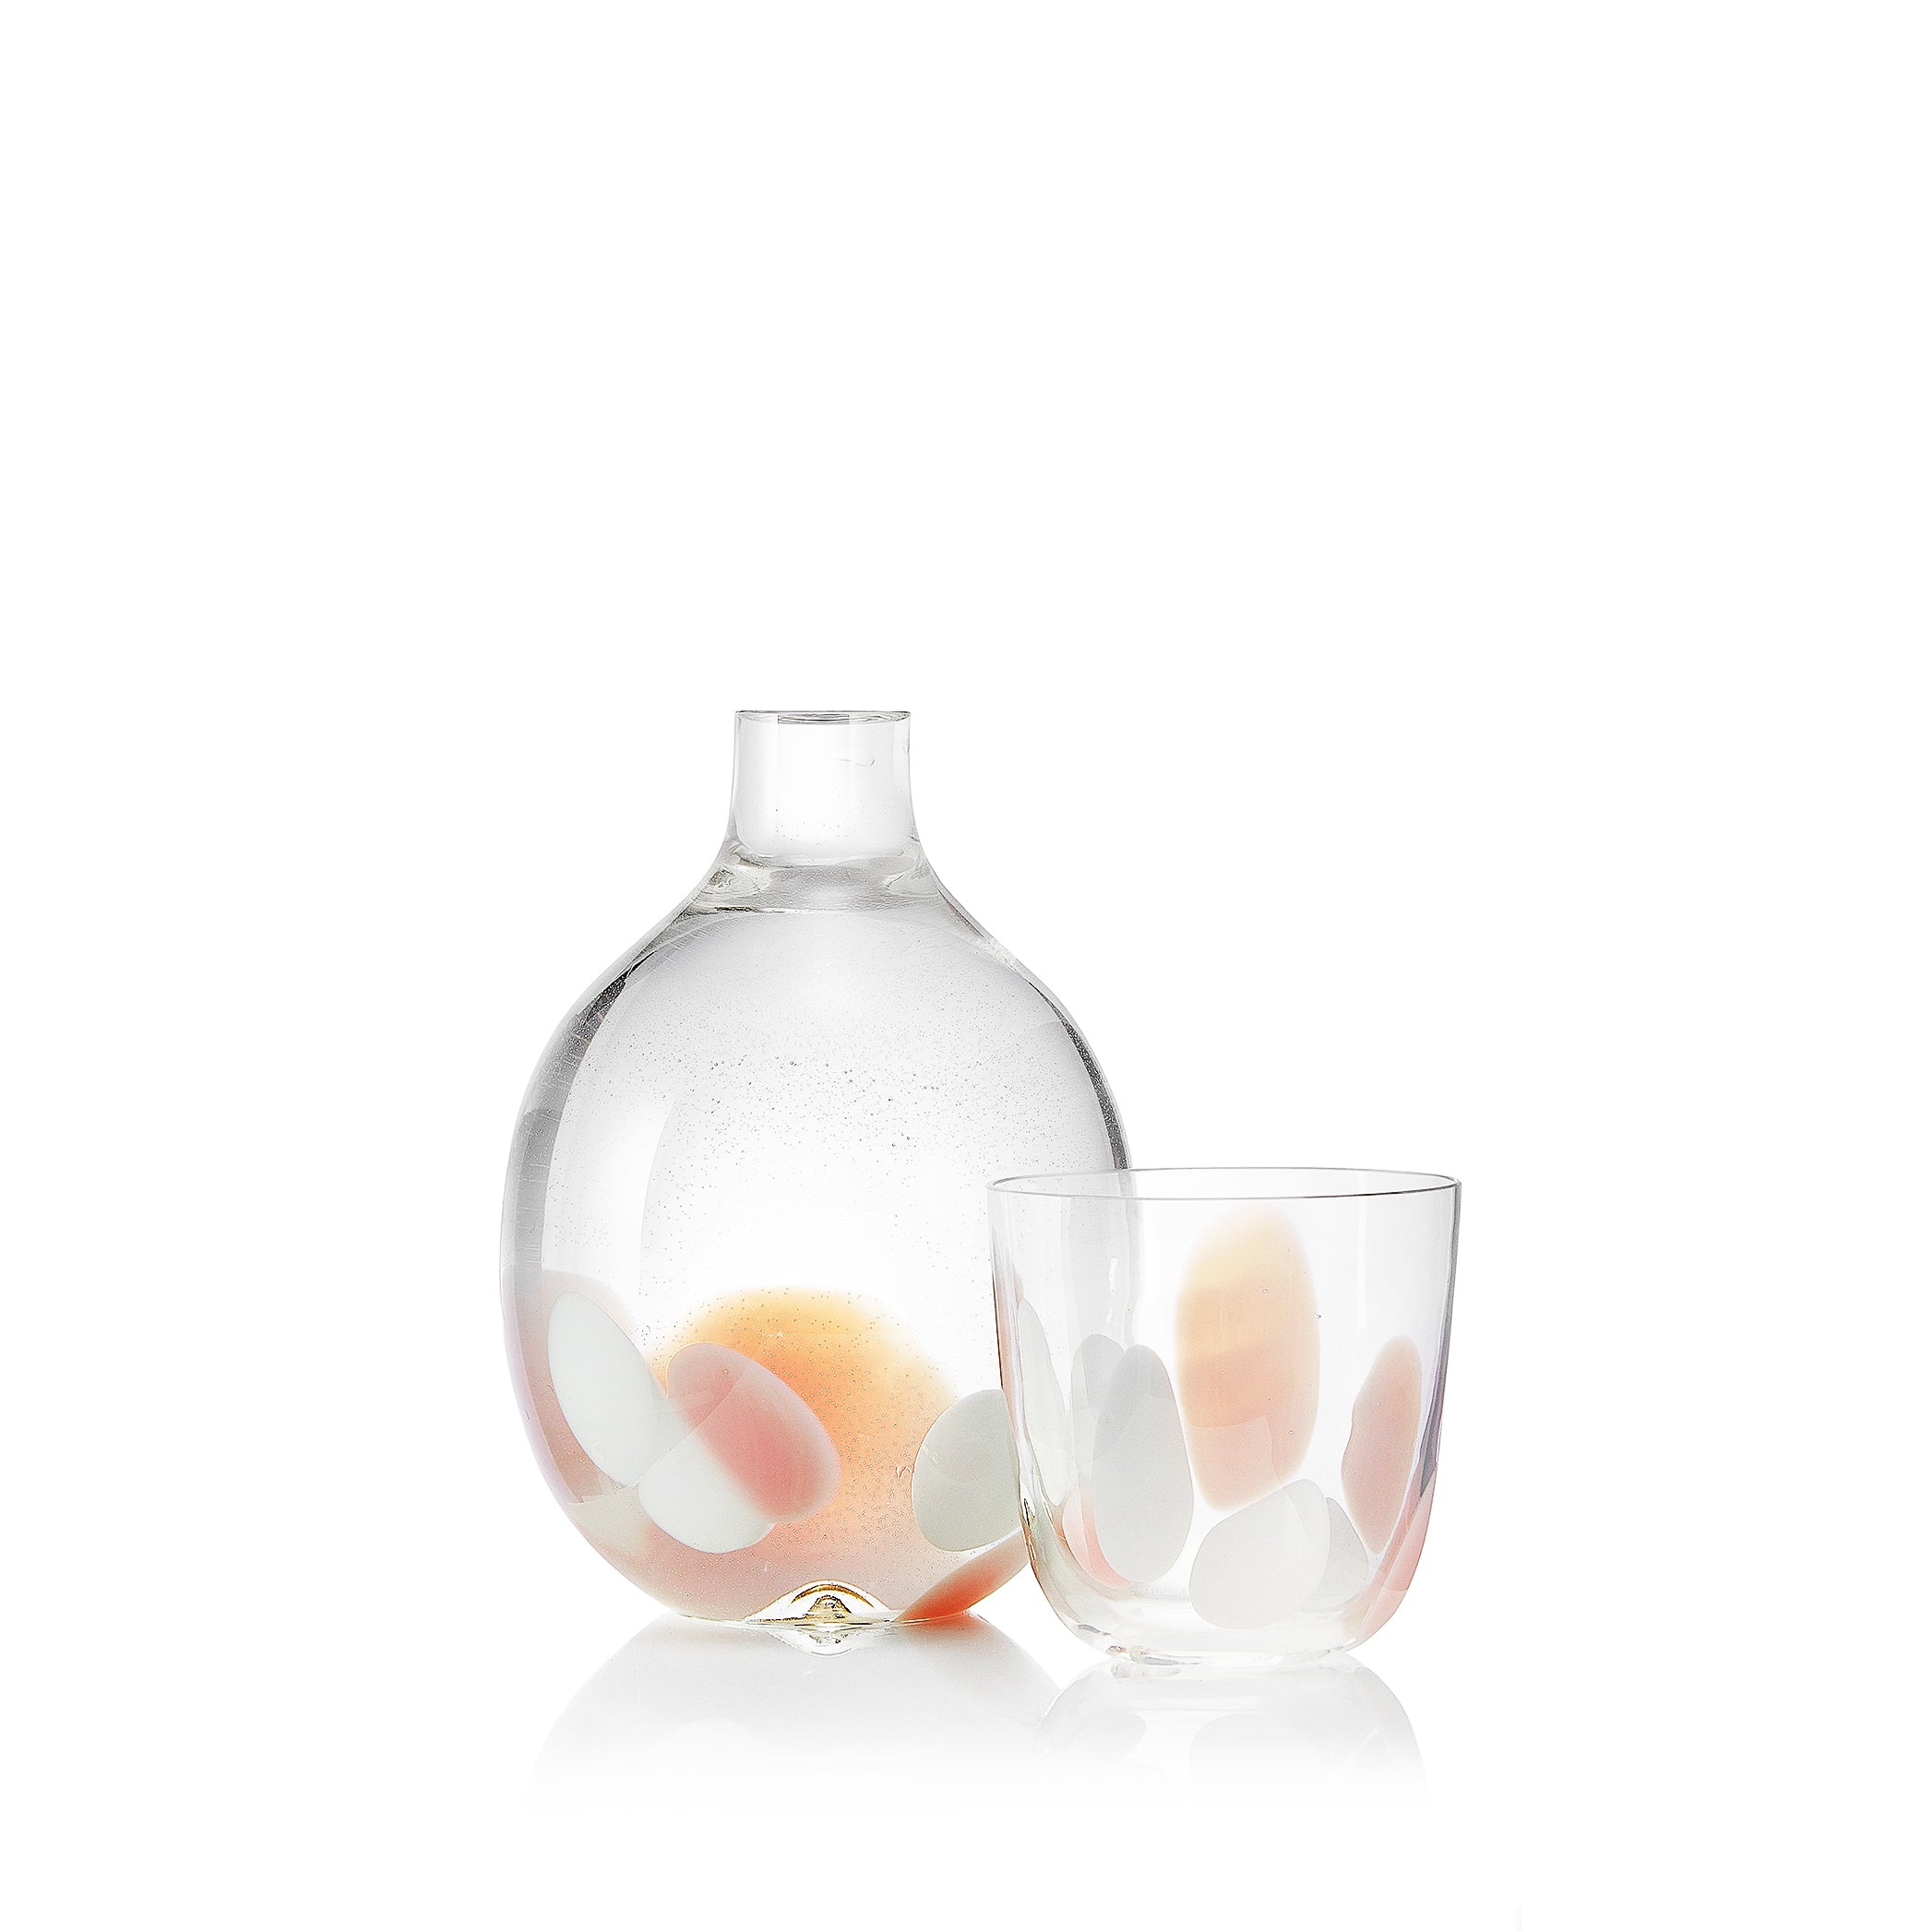 Handblown 'Spotted' Glass Vase in Rose Pink & White, 18cm x 13cm